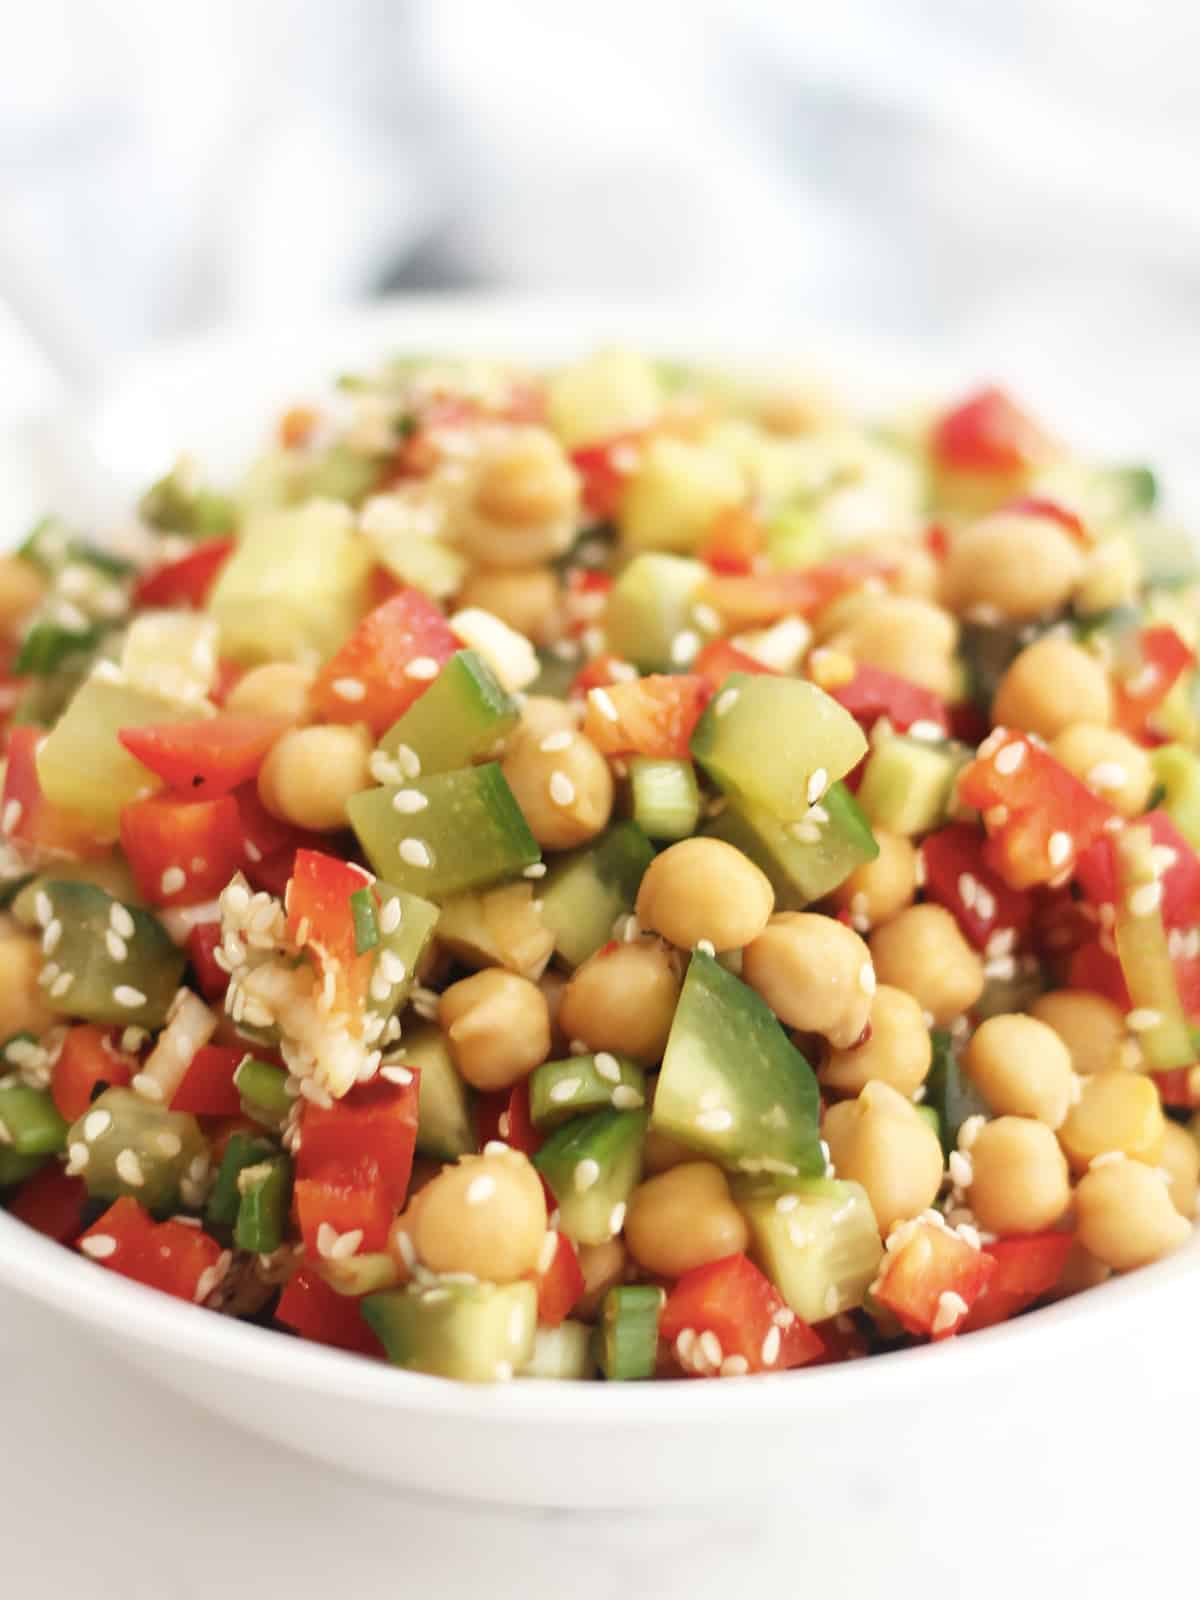 Chickpea and cucumber salad with sesame seeds.